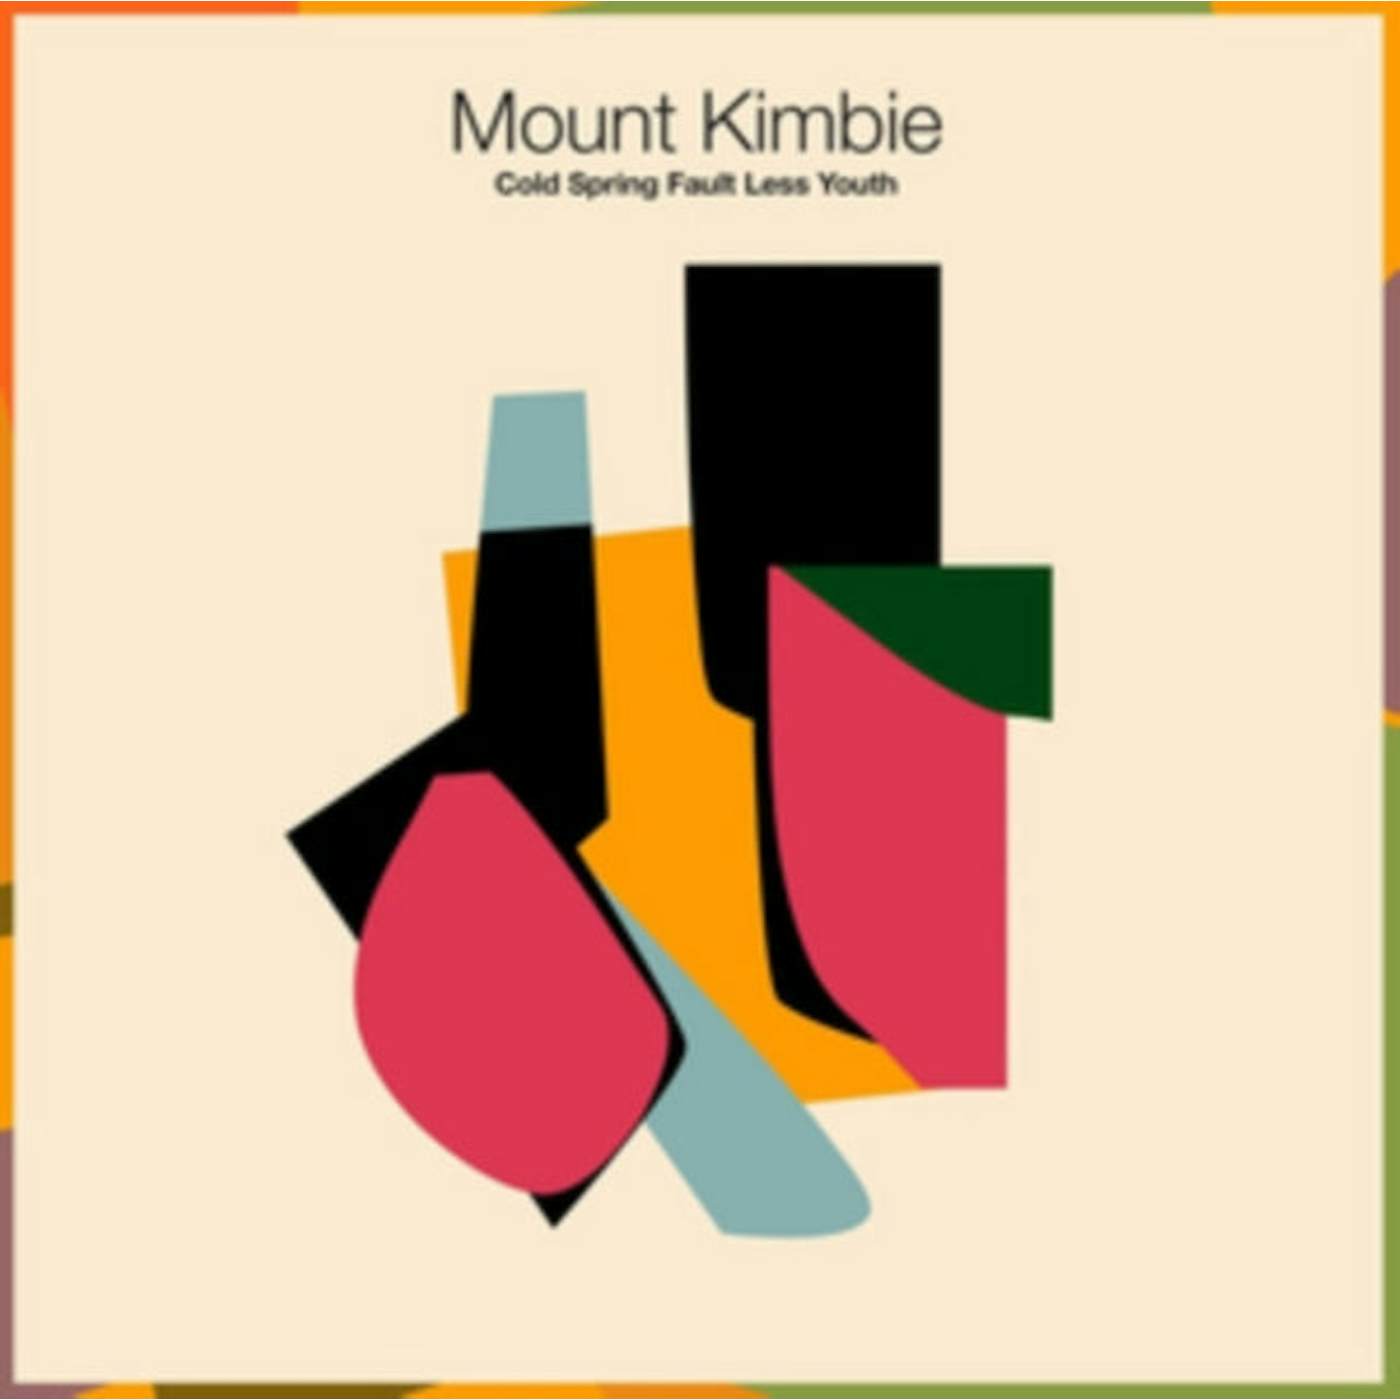 Mount Kimbie LP Vinyl Record - Cold Spring Fault Less Youth